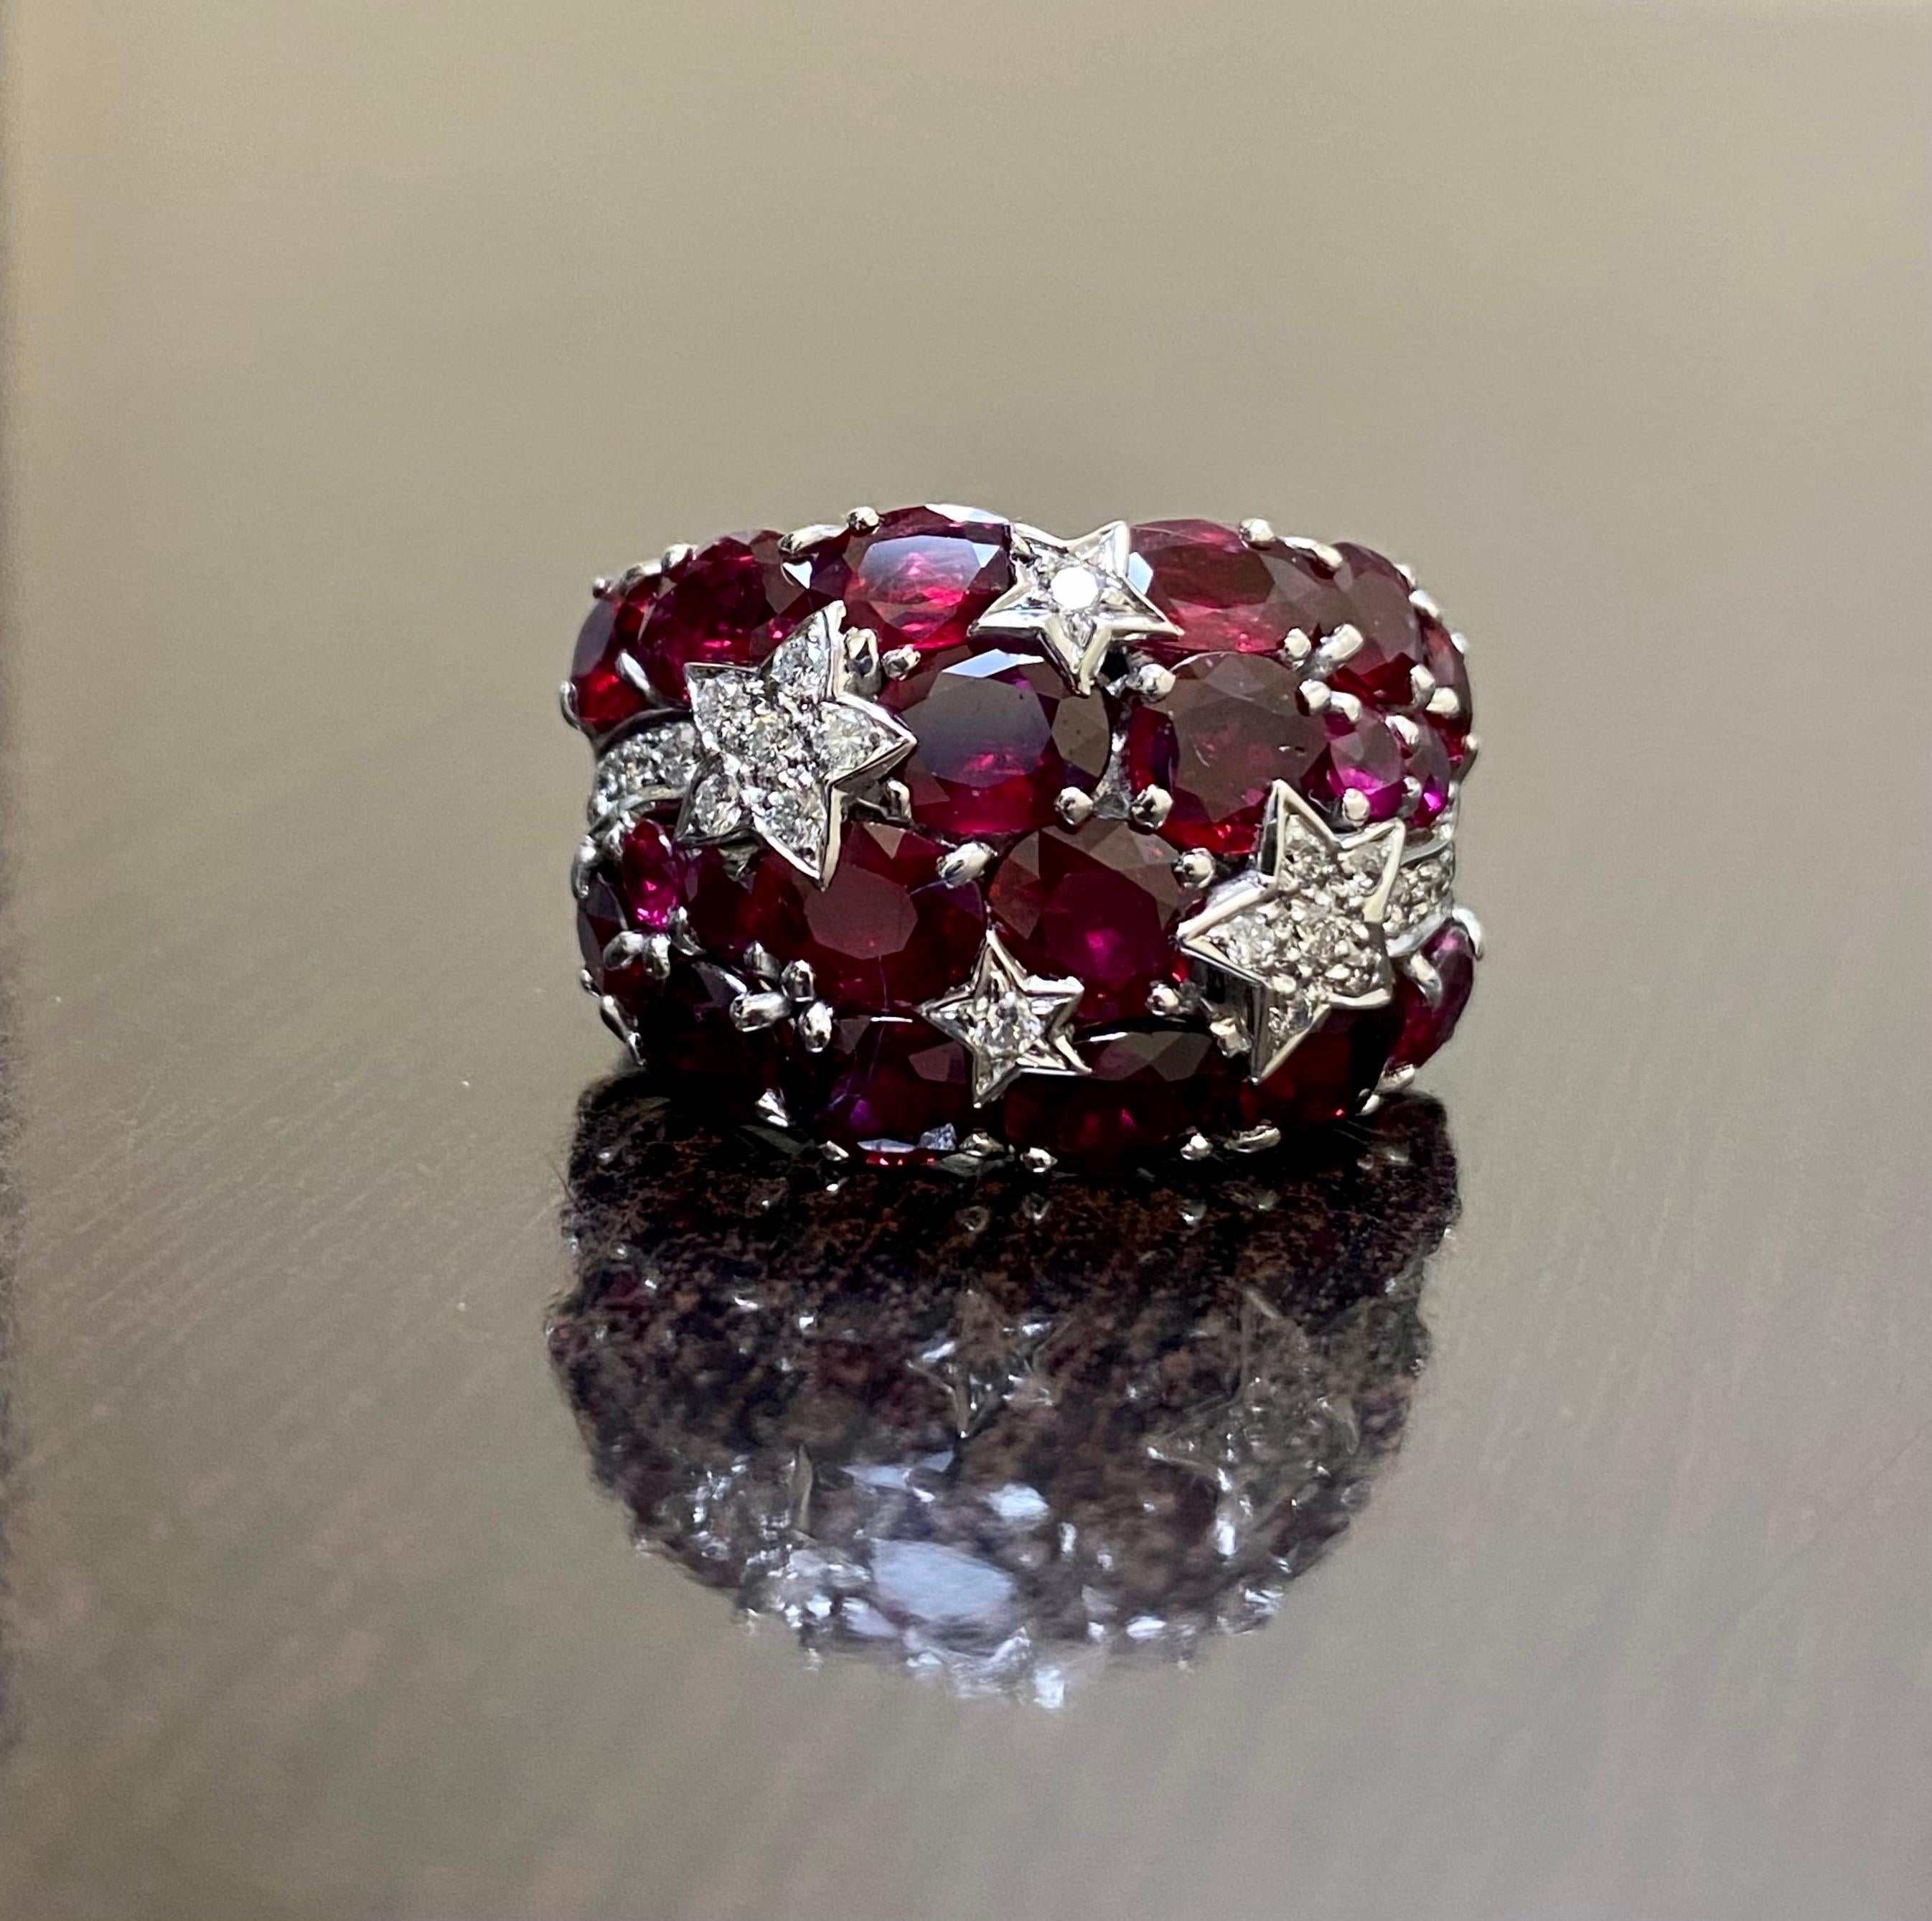 DeKara Design Collection

Metal- 18K White Gold, .750.  15.60 Grams.

Stones- 16 Oval and 4 Round Genuine Rubies 10.50 Carats, 22 Round Diamonds F-G Color VS2 Clarity 0.34 Carats.  

Size- 6 3/4.  Free Sizing.

Featuring a Handmade One of a Kind